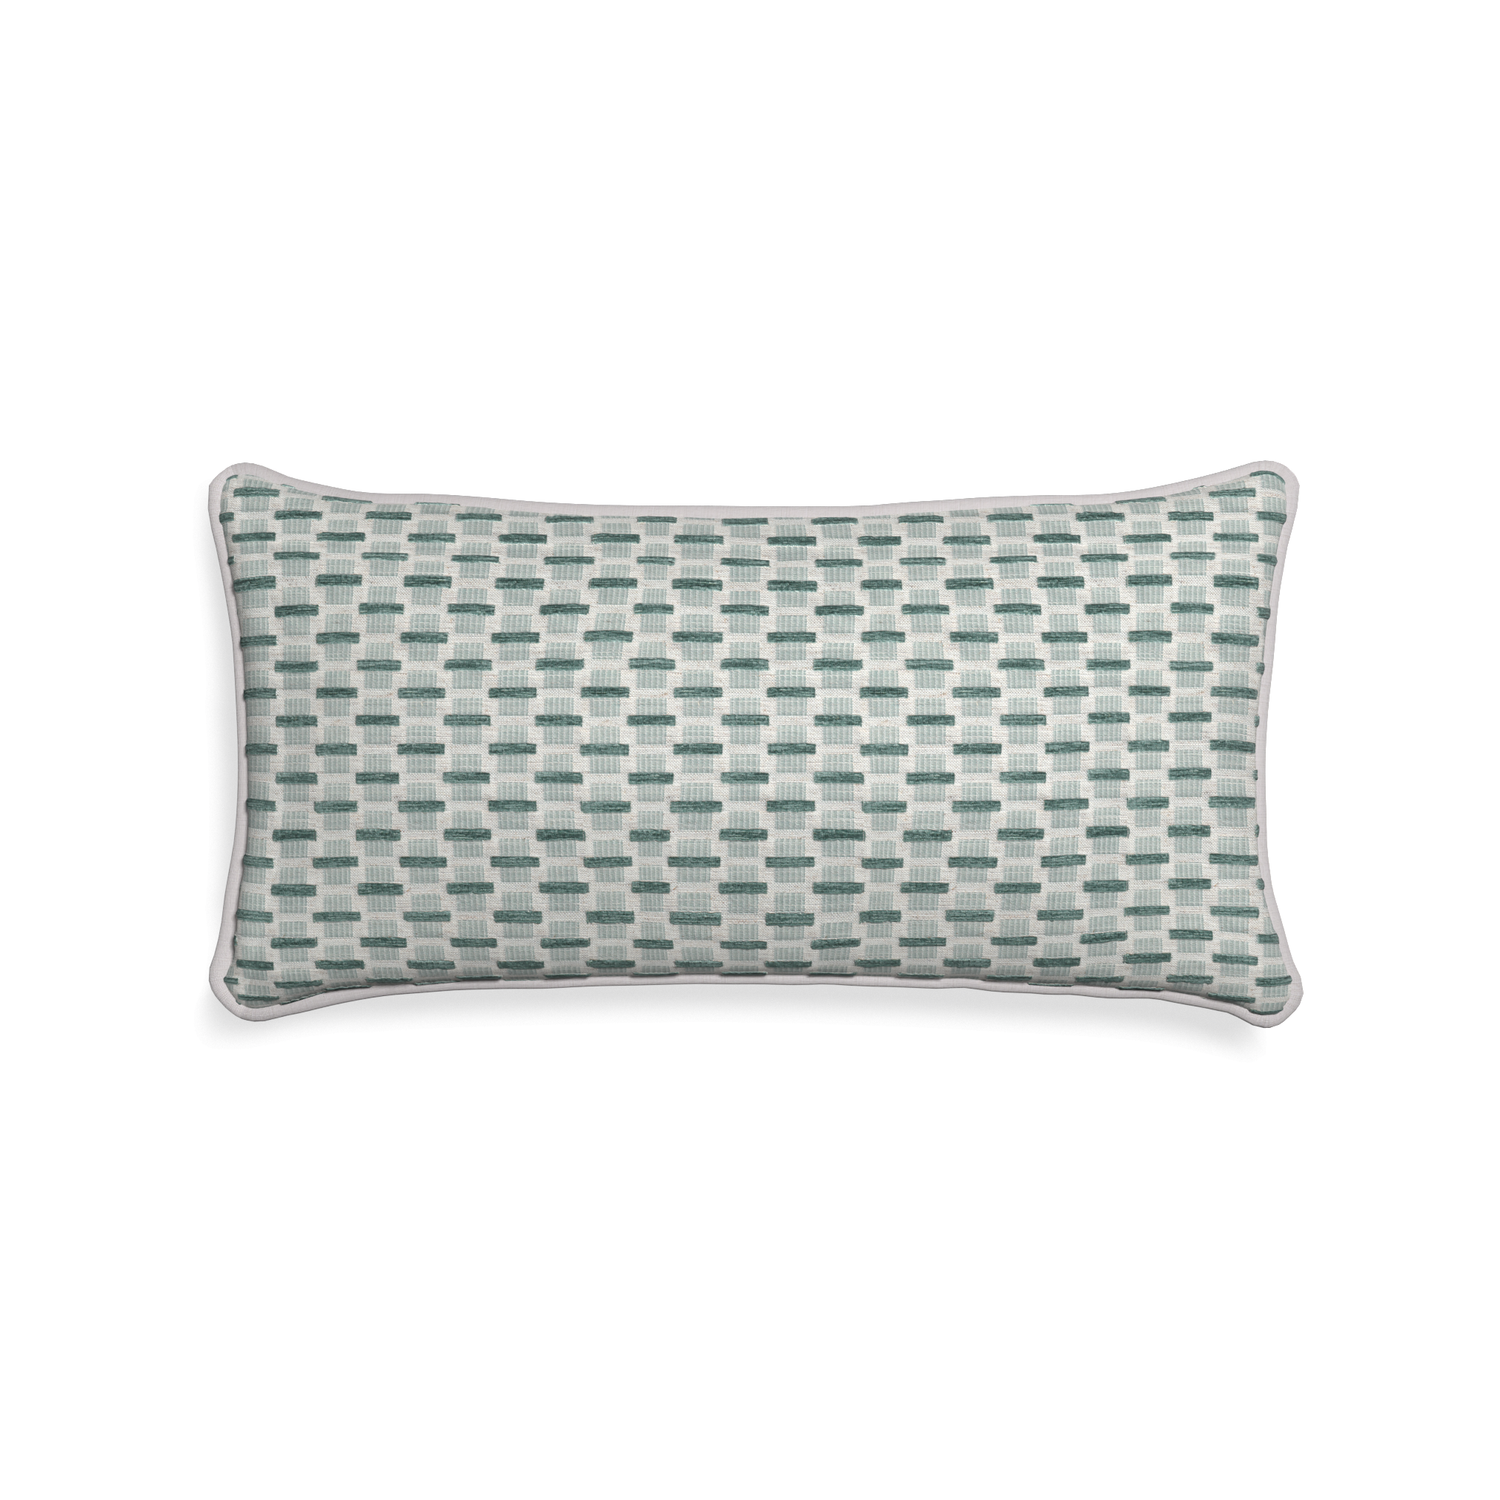 Midi-lumbar willow mint custom green geometric chenillepillow with pebble piping on white background